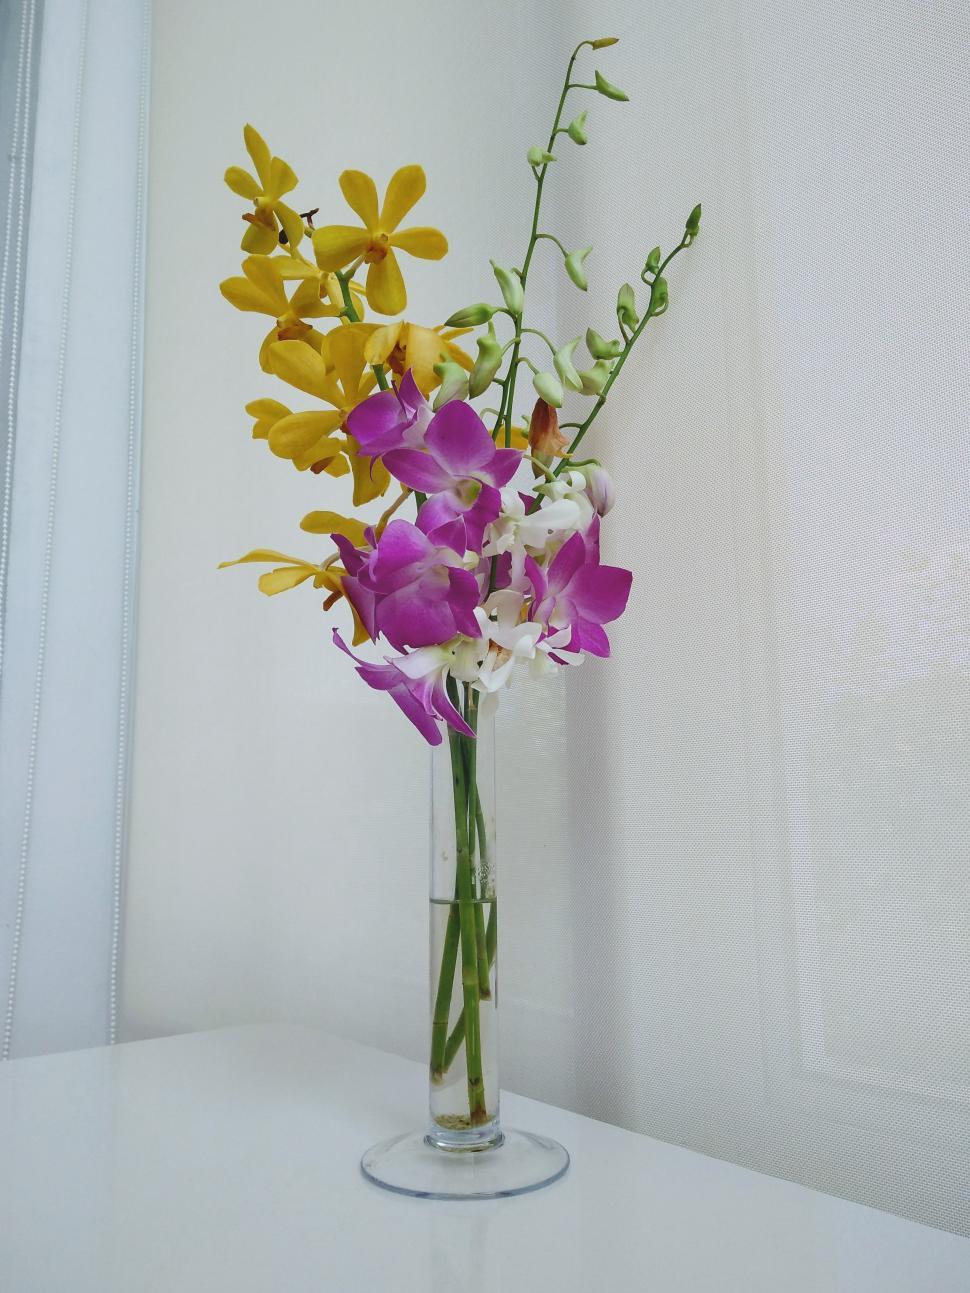 Free Image of Orchids in a glass vase  